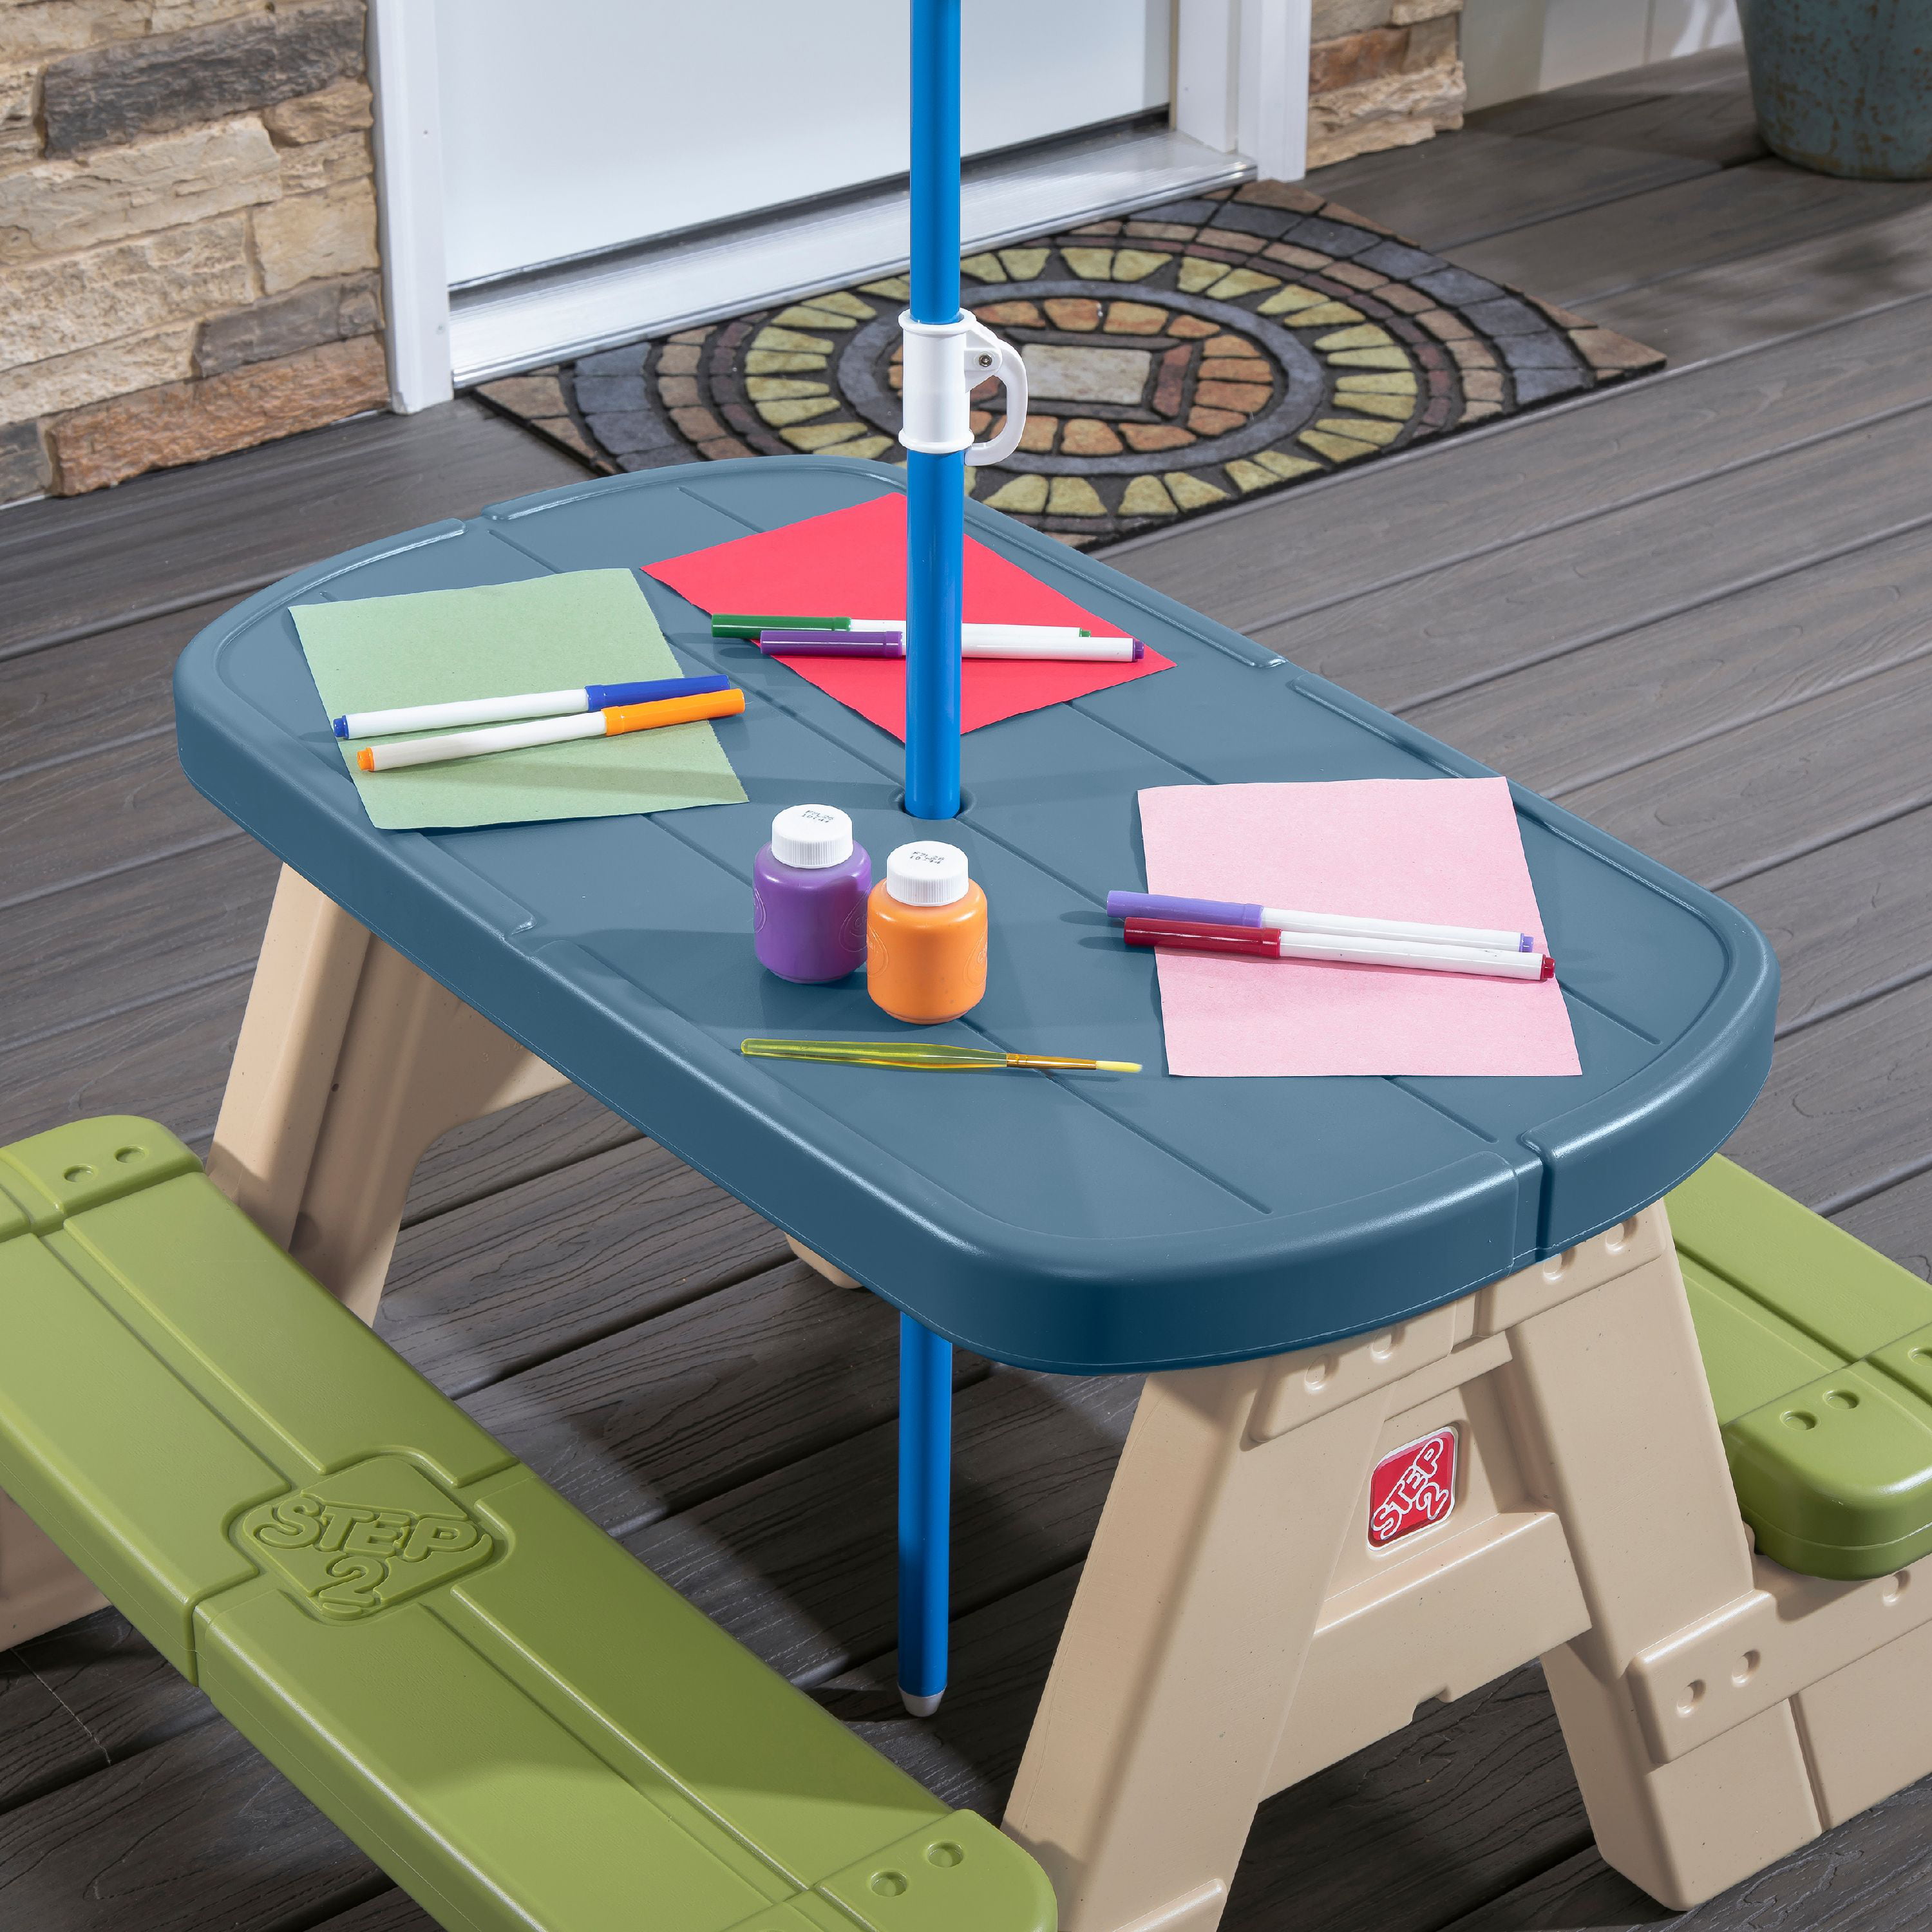 Step2 Sit and Play Picnic Table with Umbrella おもちゃ [並行輸入品]欧米で人気の並行輸入品